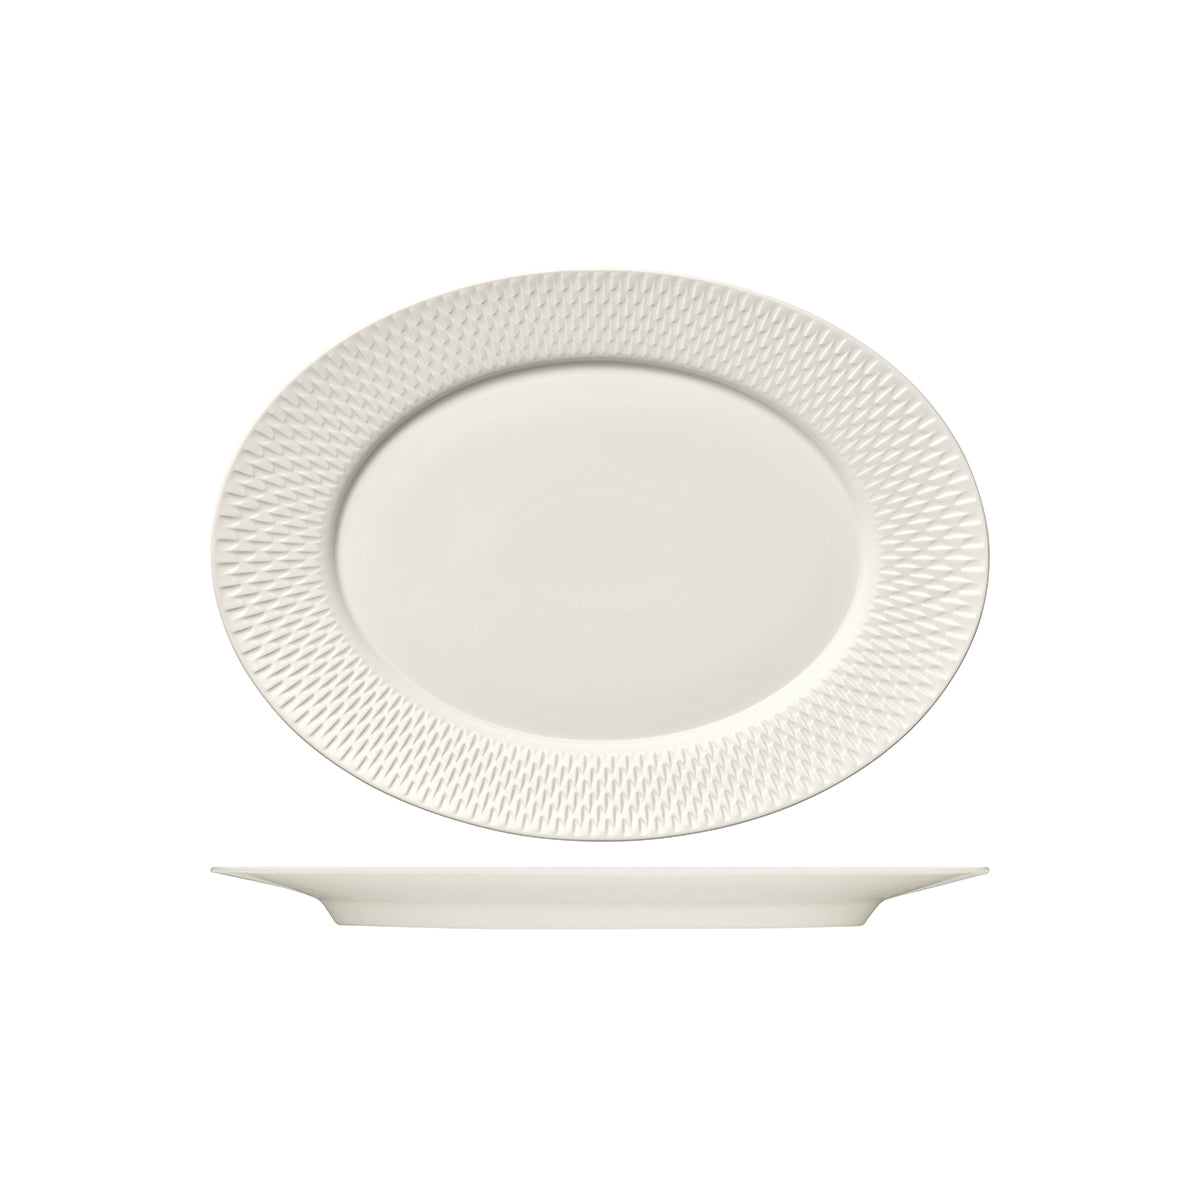 BHS6682083 Bauscher Purity Oval Platter with Rim Relief 330x244mm Tomkin Australia Hospitality Supplies